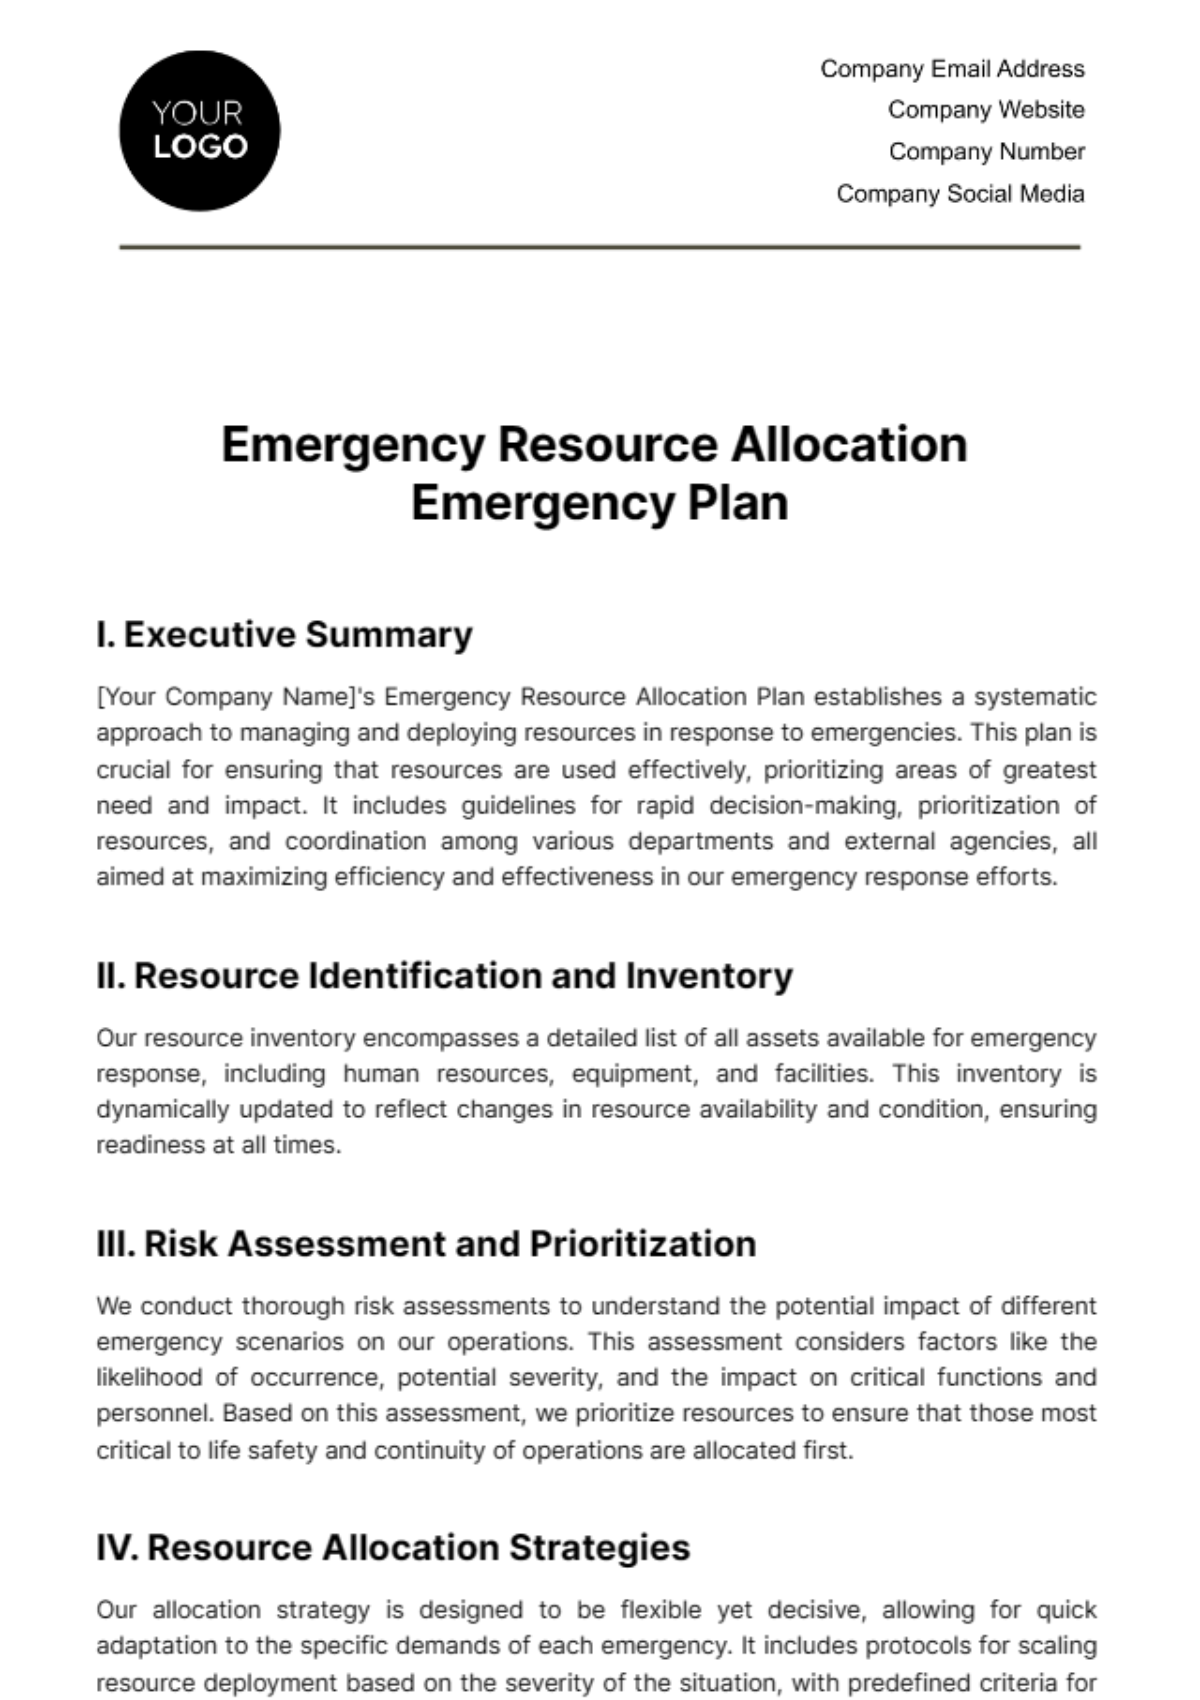 Free Emergency Resource Allocation Emergency Plan Template